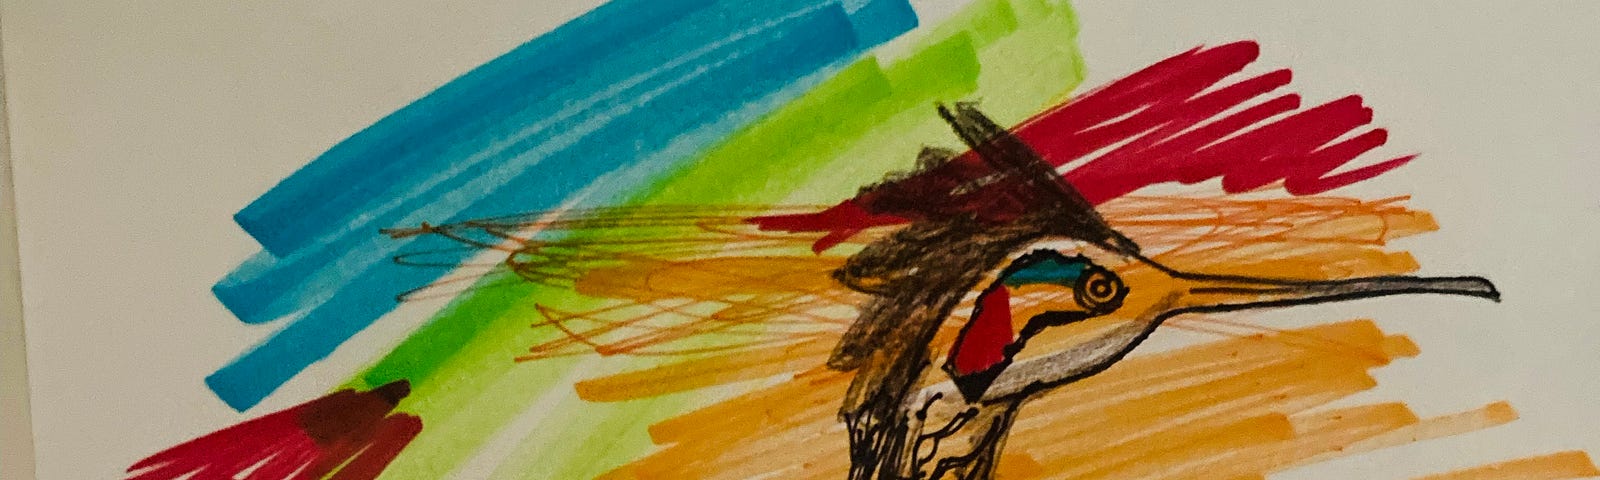 A marker sketch of a road runner over a backdrop of scribbled blue, green, red and orange